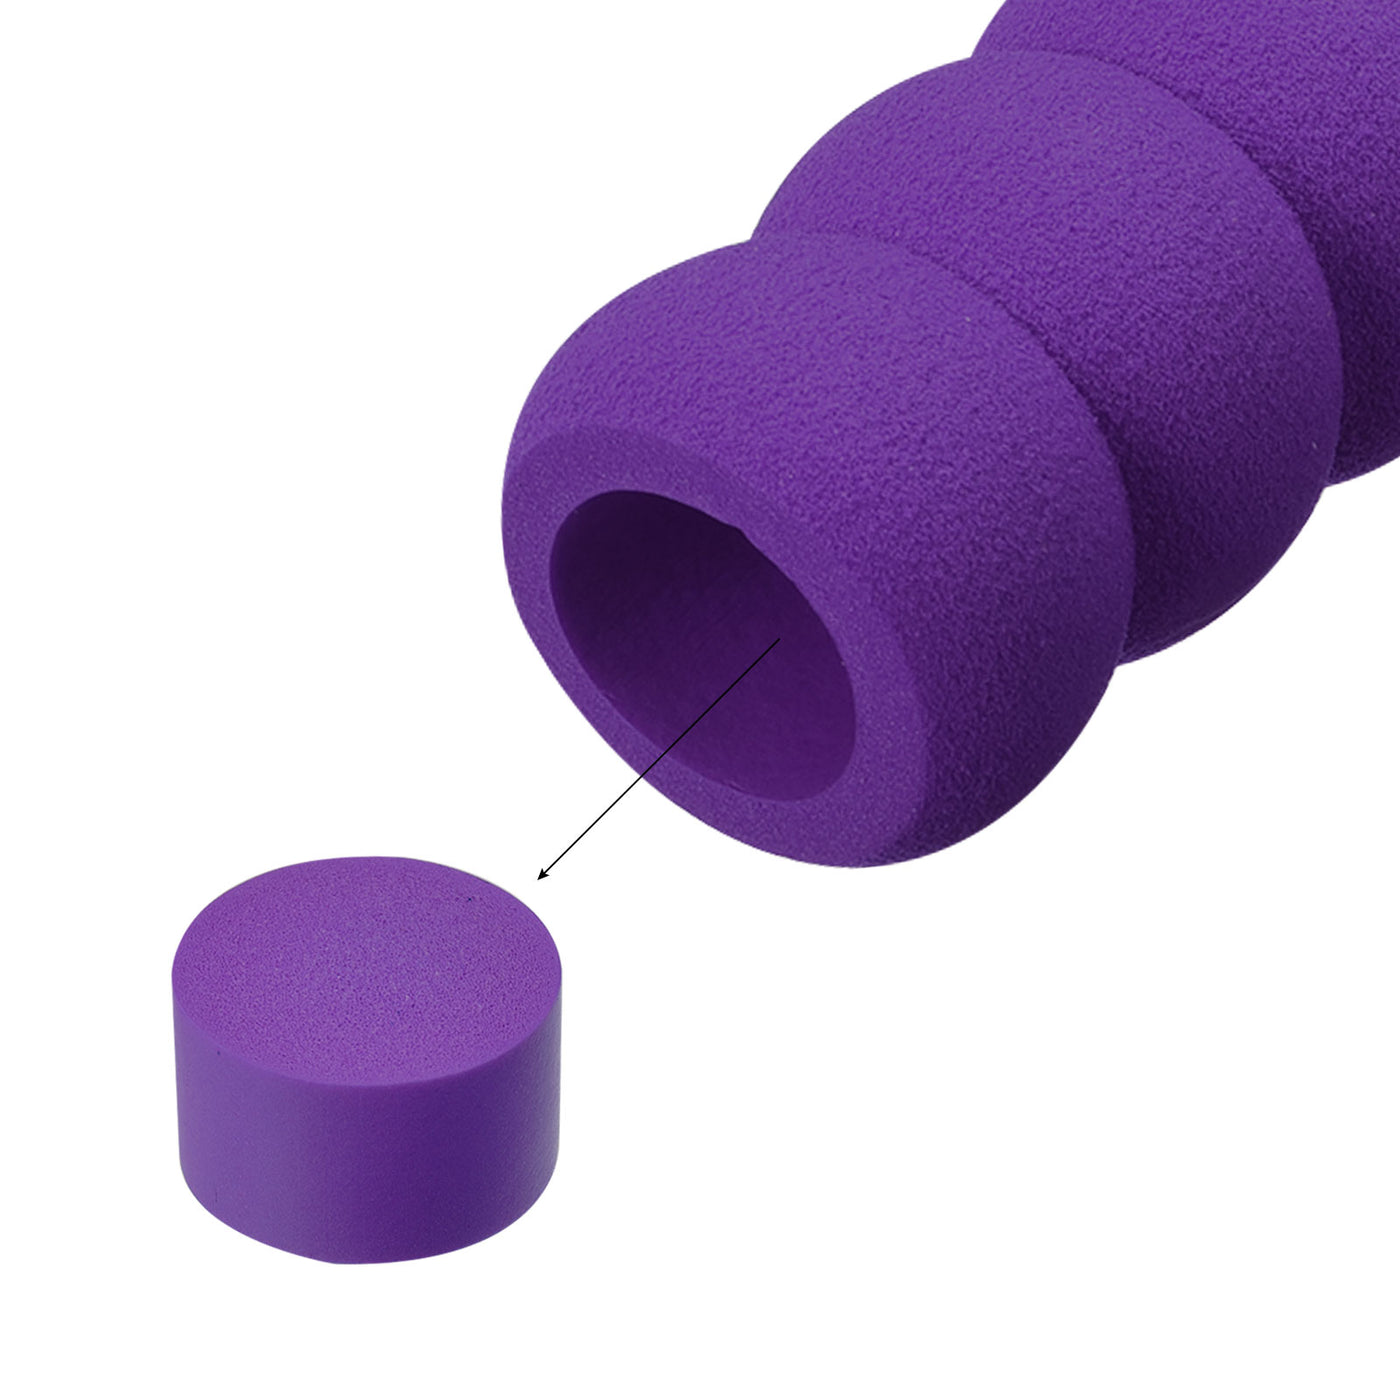 uxcell Uxcell Door Handle Cover Nitrile Rubber Protector Spiral Sleeve Purple 2pcs